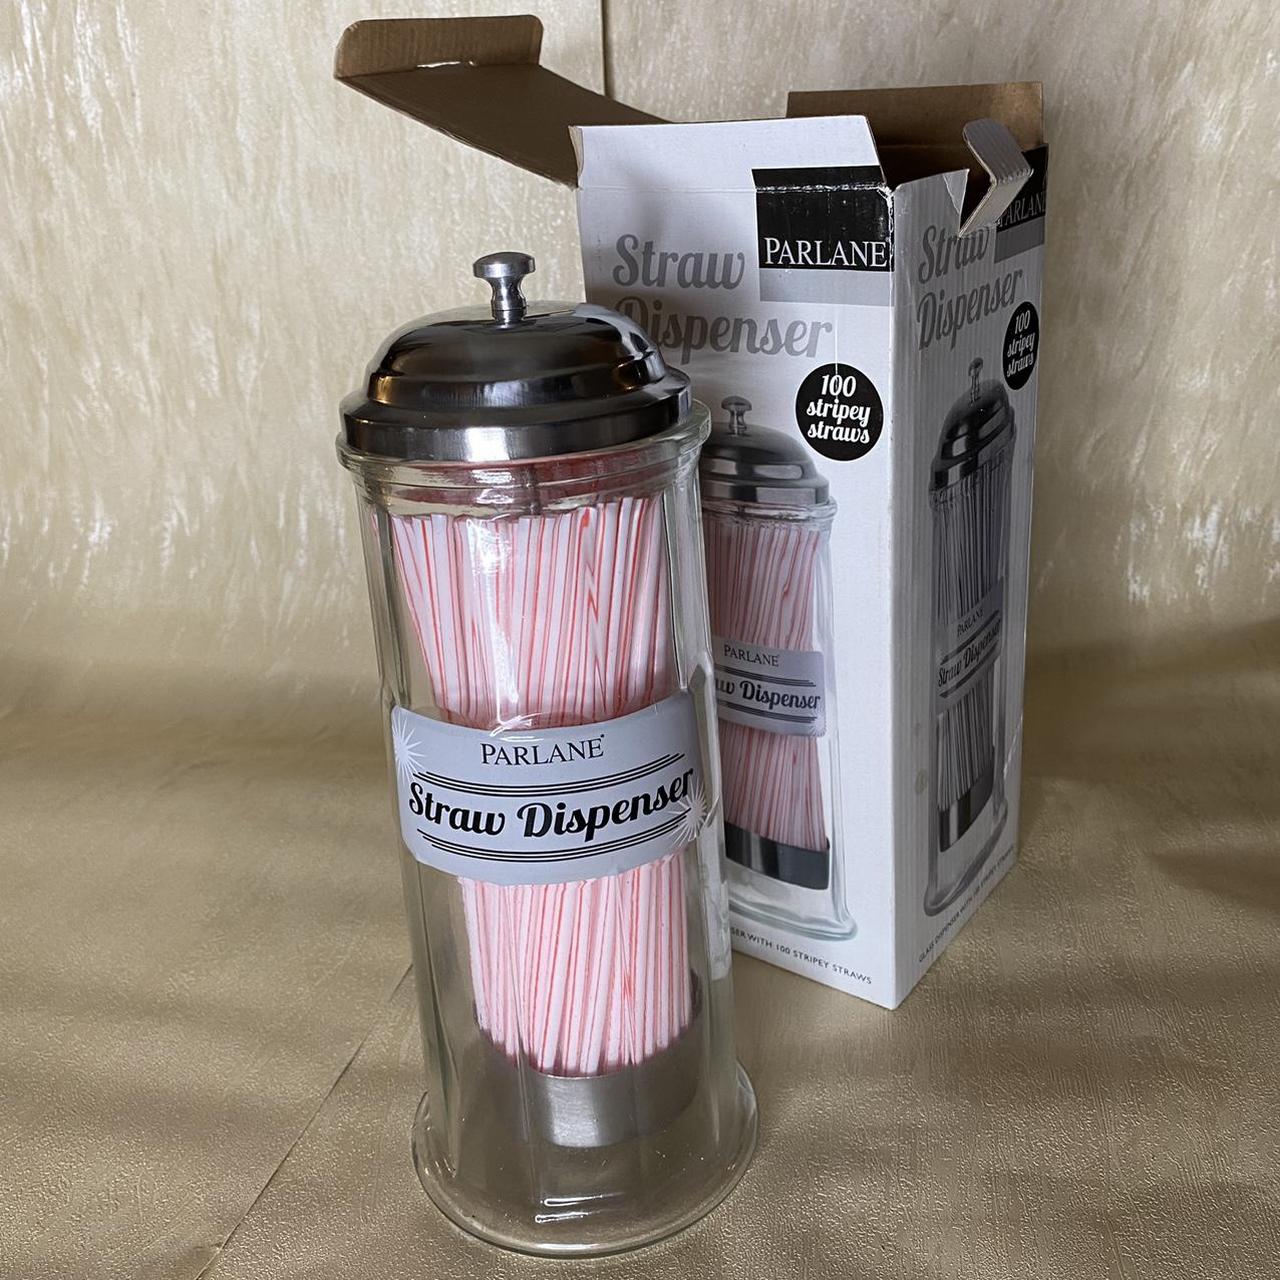 Product Image 1 - 🎄 Christmas Gifts 🎄

Straw dispenser.